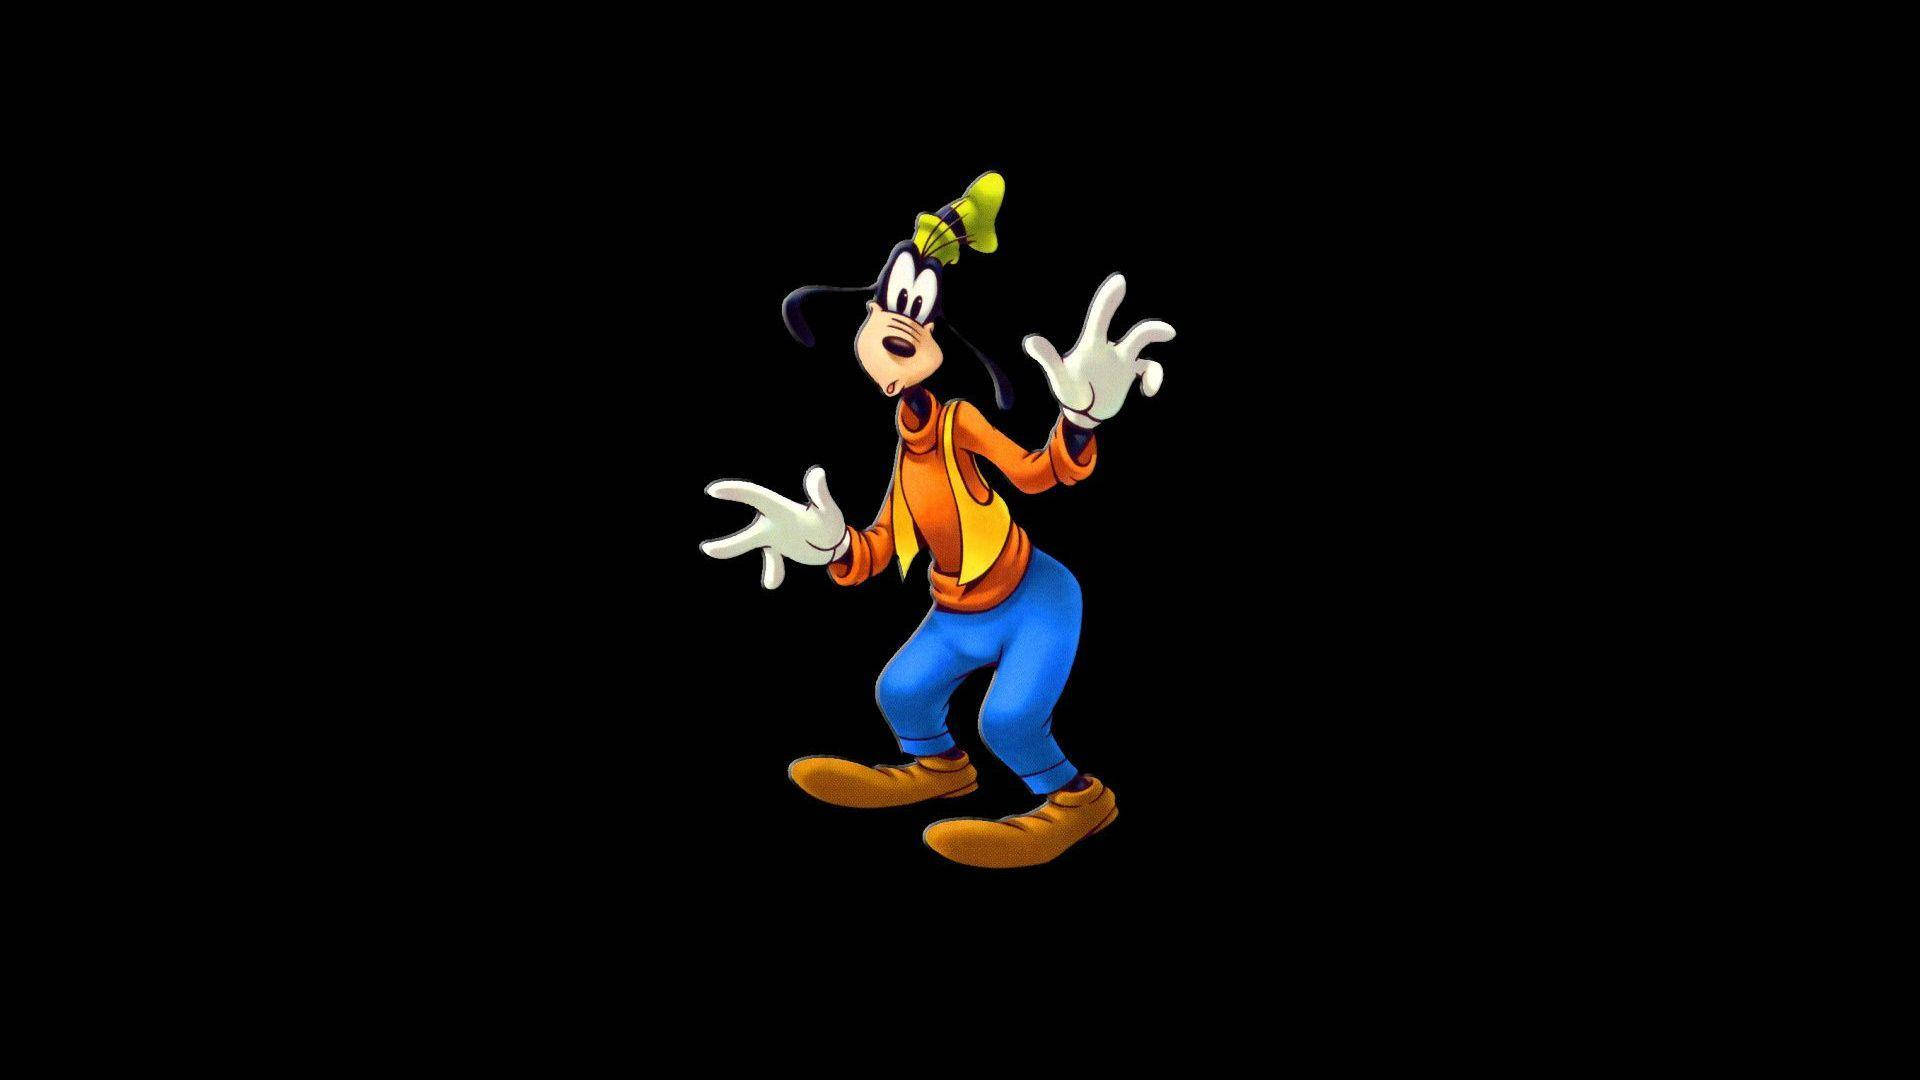 Free Goofy Wallpaper Downloads, [100+] Goofy Wallpapers for FREE |  